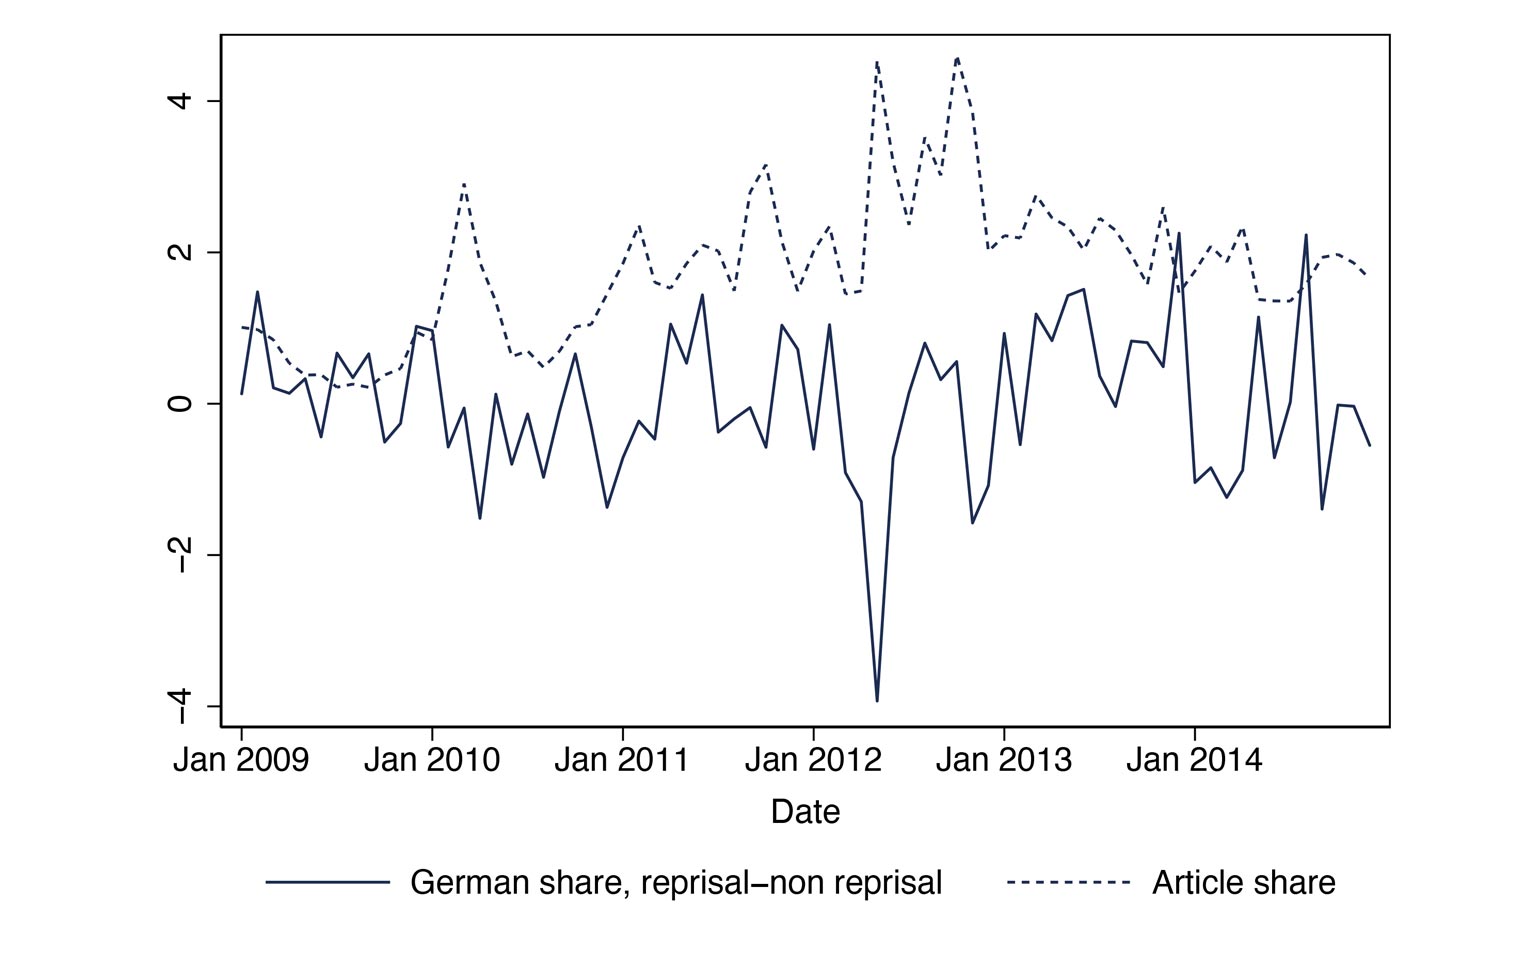 German-Greek conflict and German market share in prefectures with and without reprisals. The solid line is the difference in the seasonally adjusted (expressed as difference of month t from month t − 12) share of German car registrations in prefectures with reprisals versus those without. The dotted line is the monthly share of news articles related to German-Greek conflict. Both series are normalized by their standard deviation. Source: Vasiliki Fouka, Hans-Joachim Voth